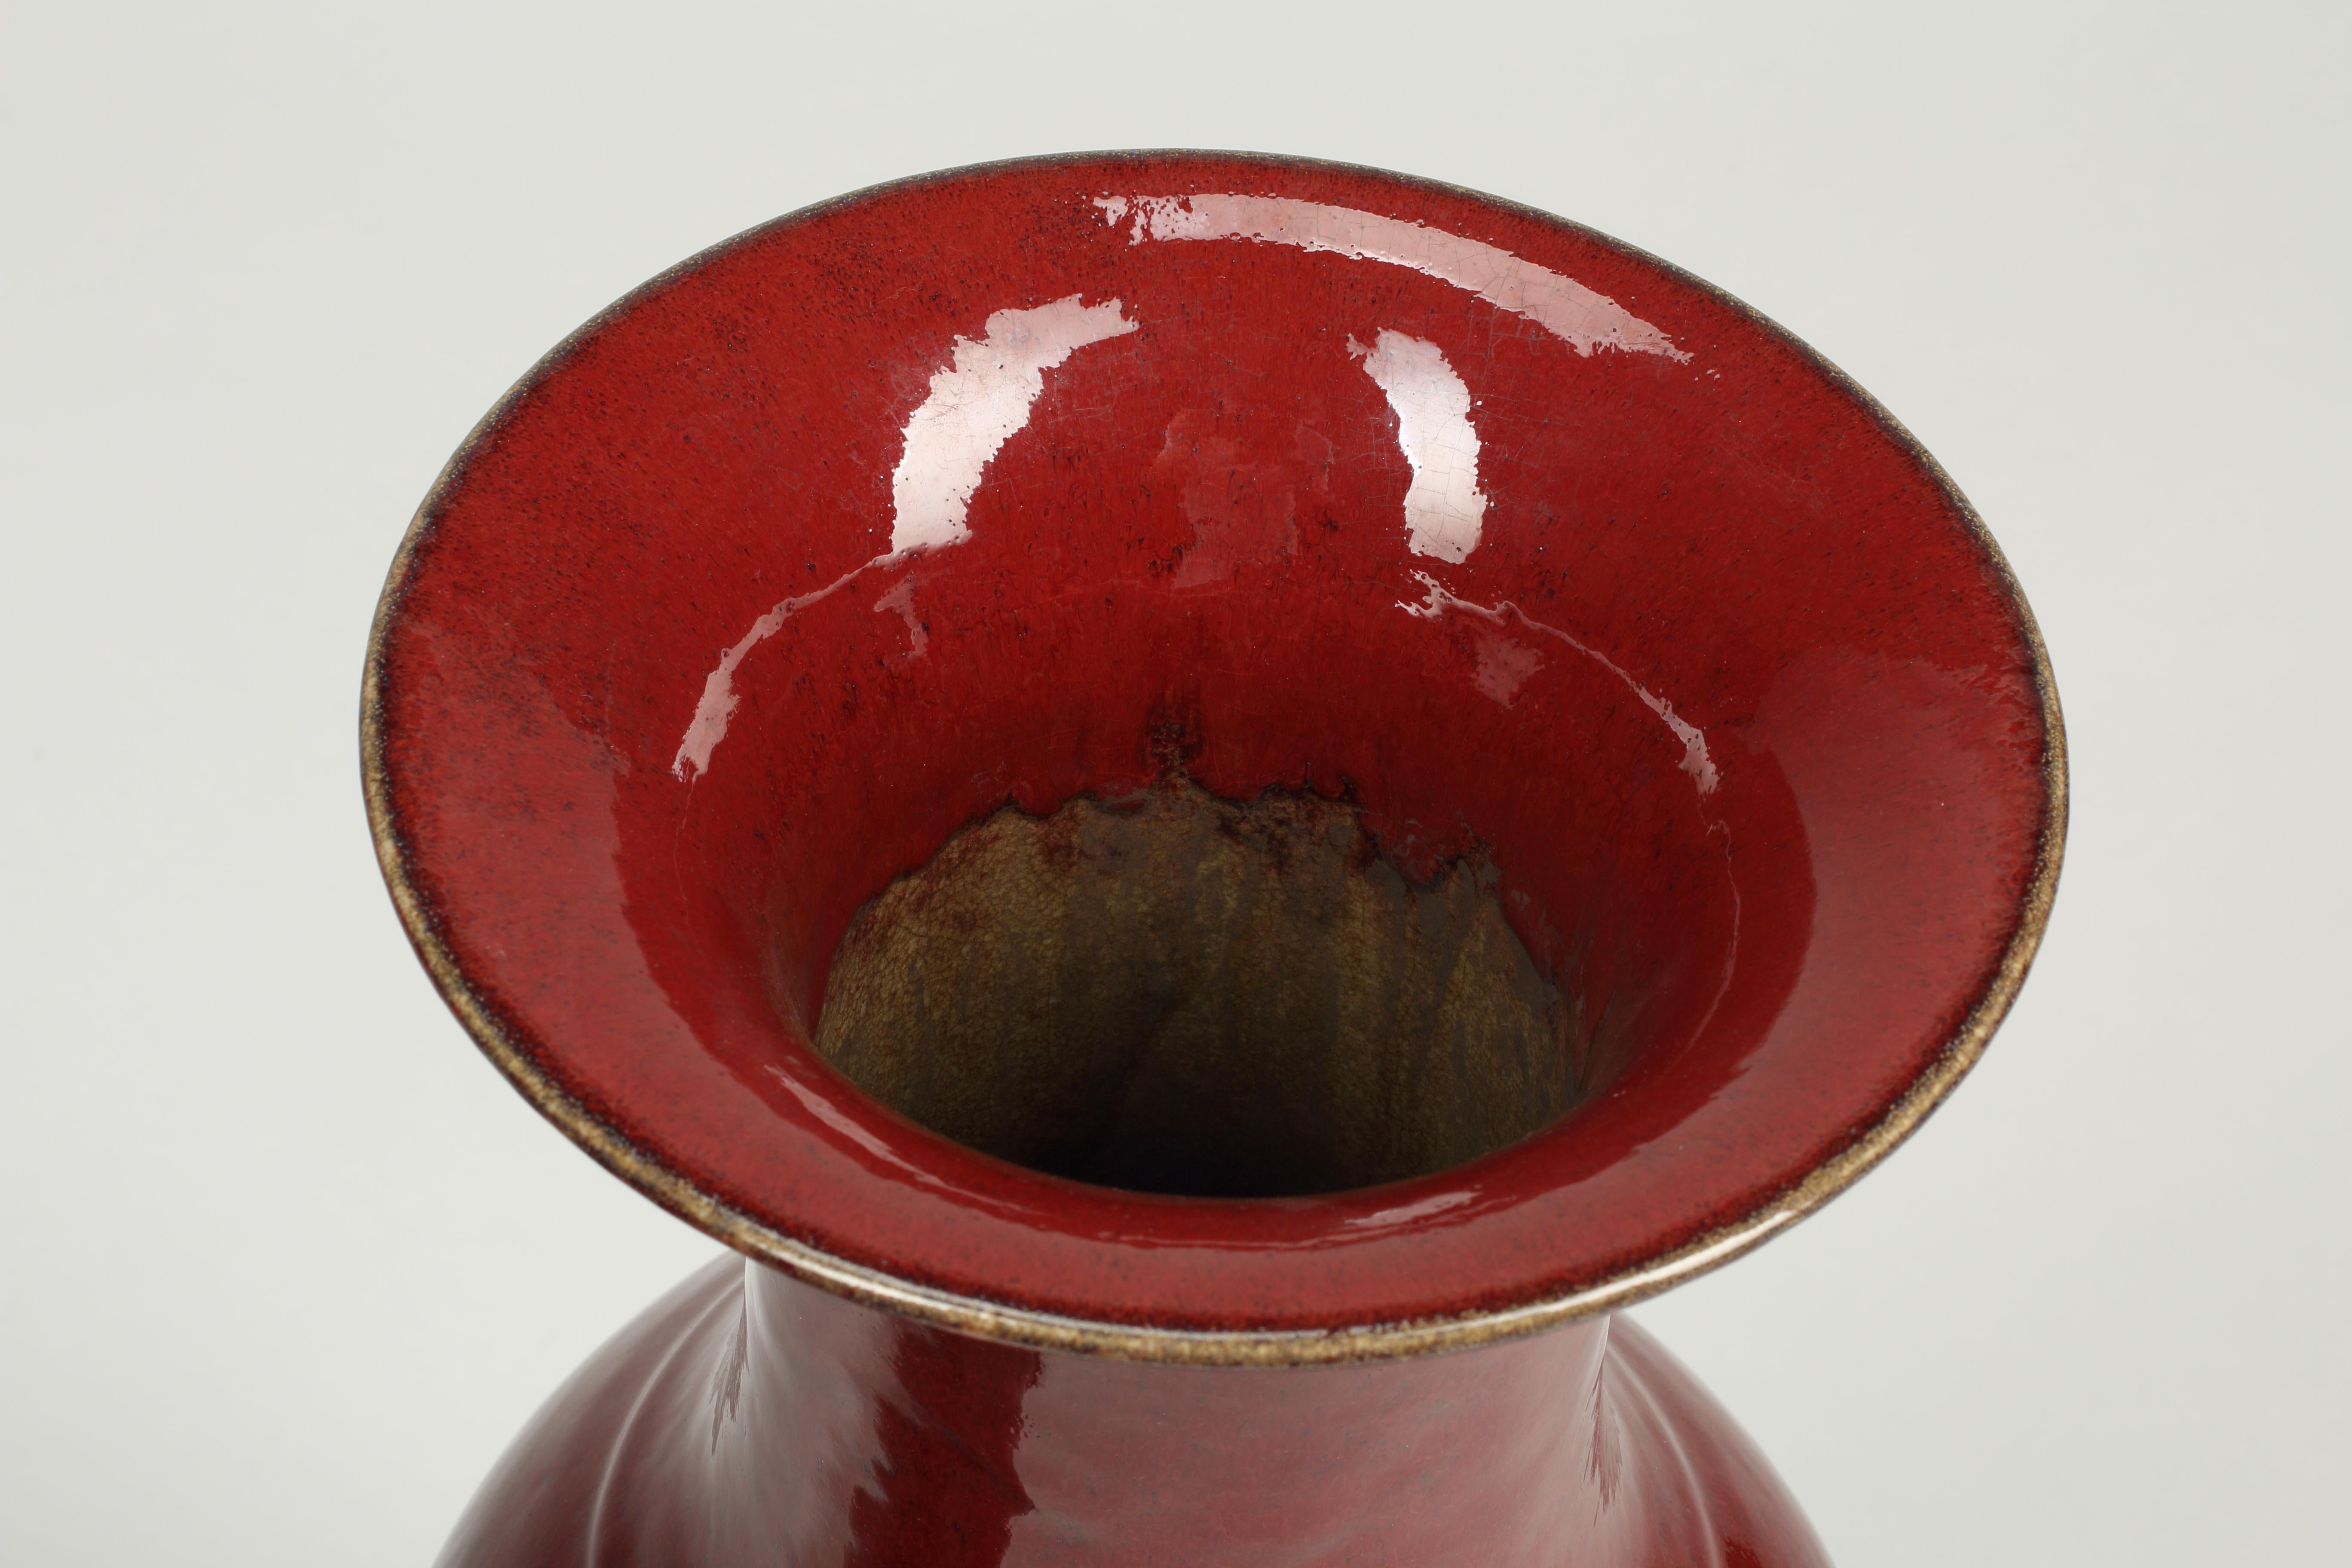 A highly decorative pair of large sang-de-boeuf glazed vase, 20th century.
The baluster vessel rising from a lipped foot to a high-shouldered body and trumpet mouth, covered overall in a rich, glassy red glaze.